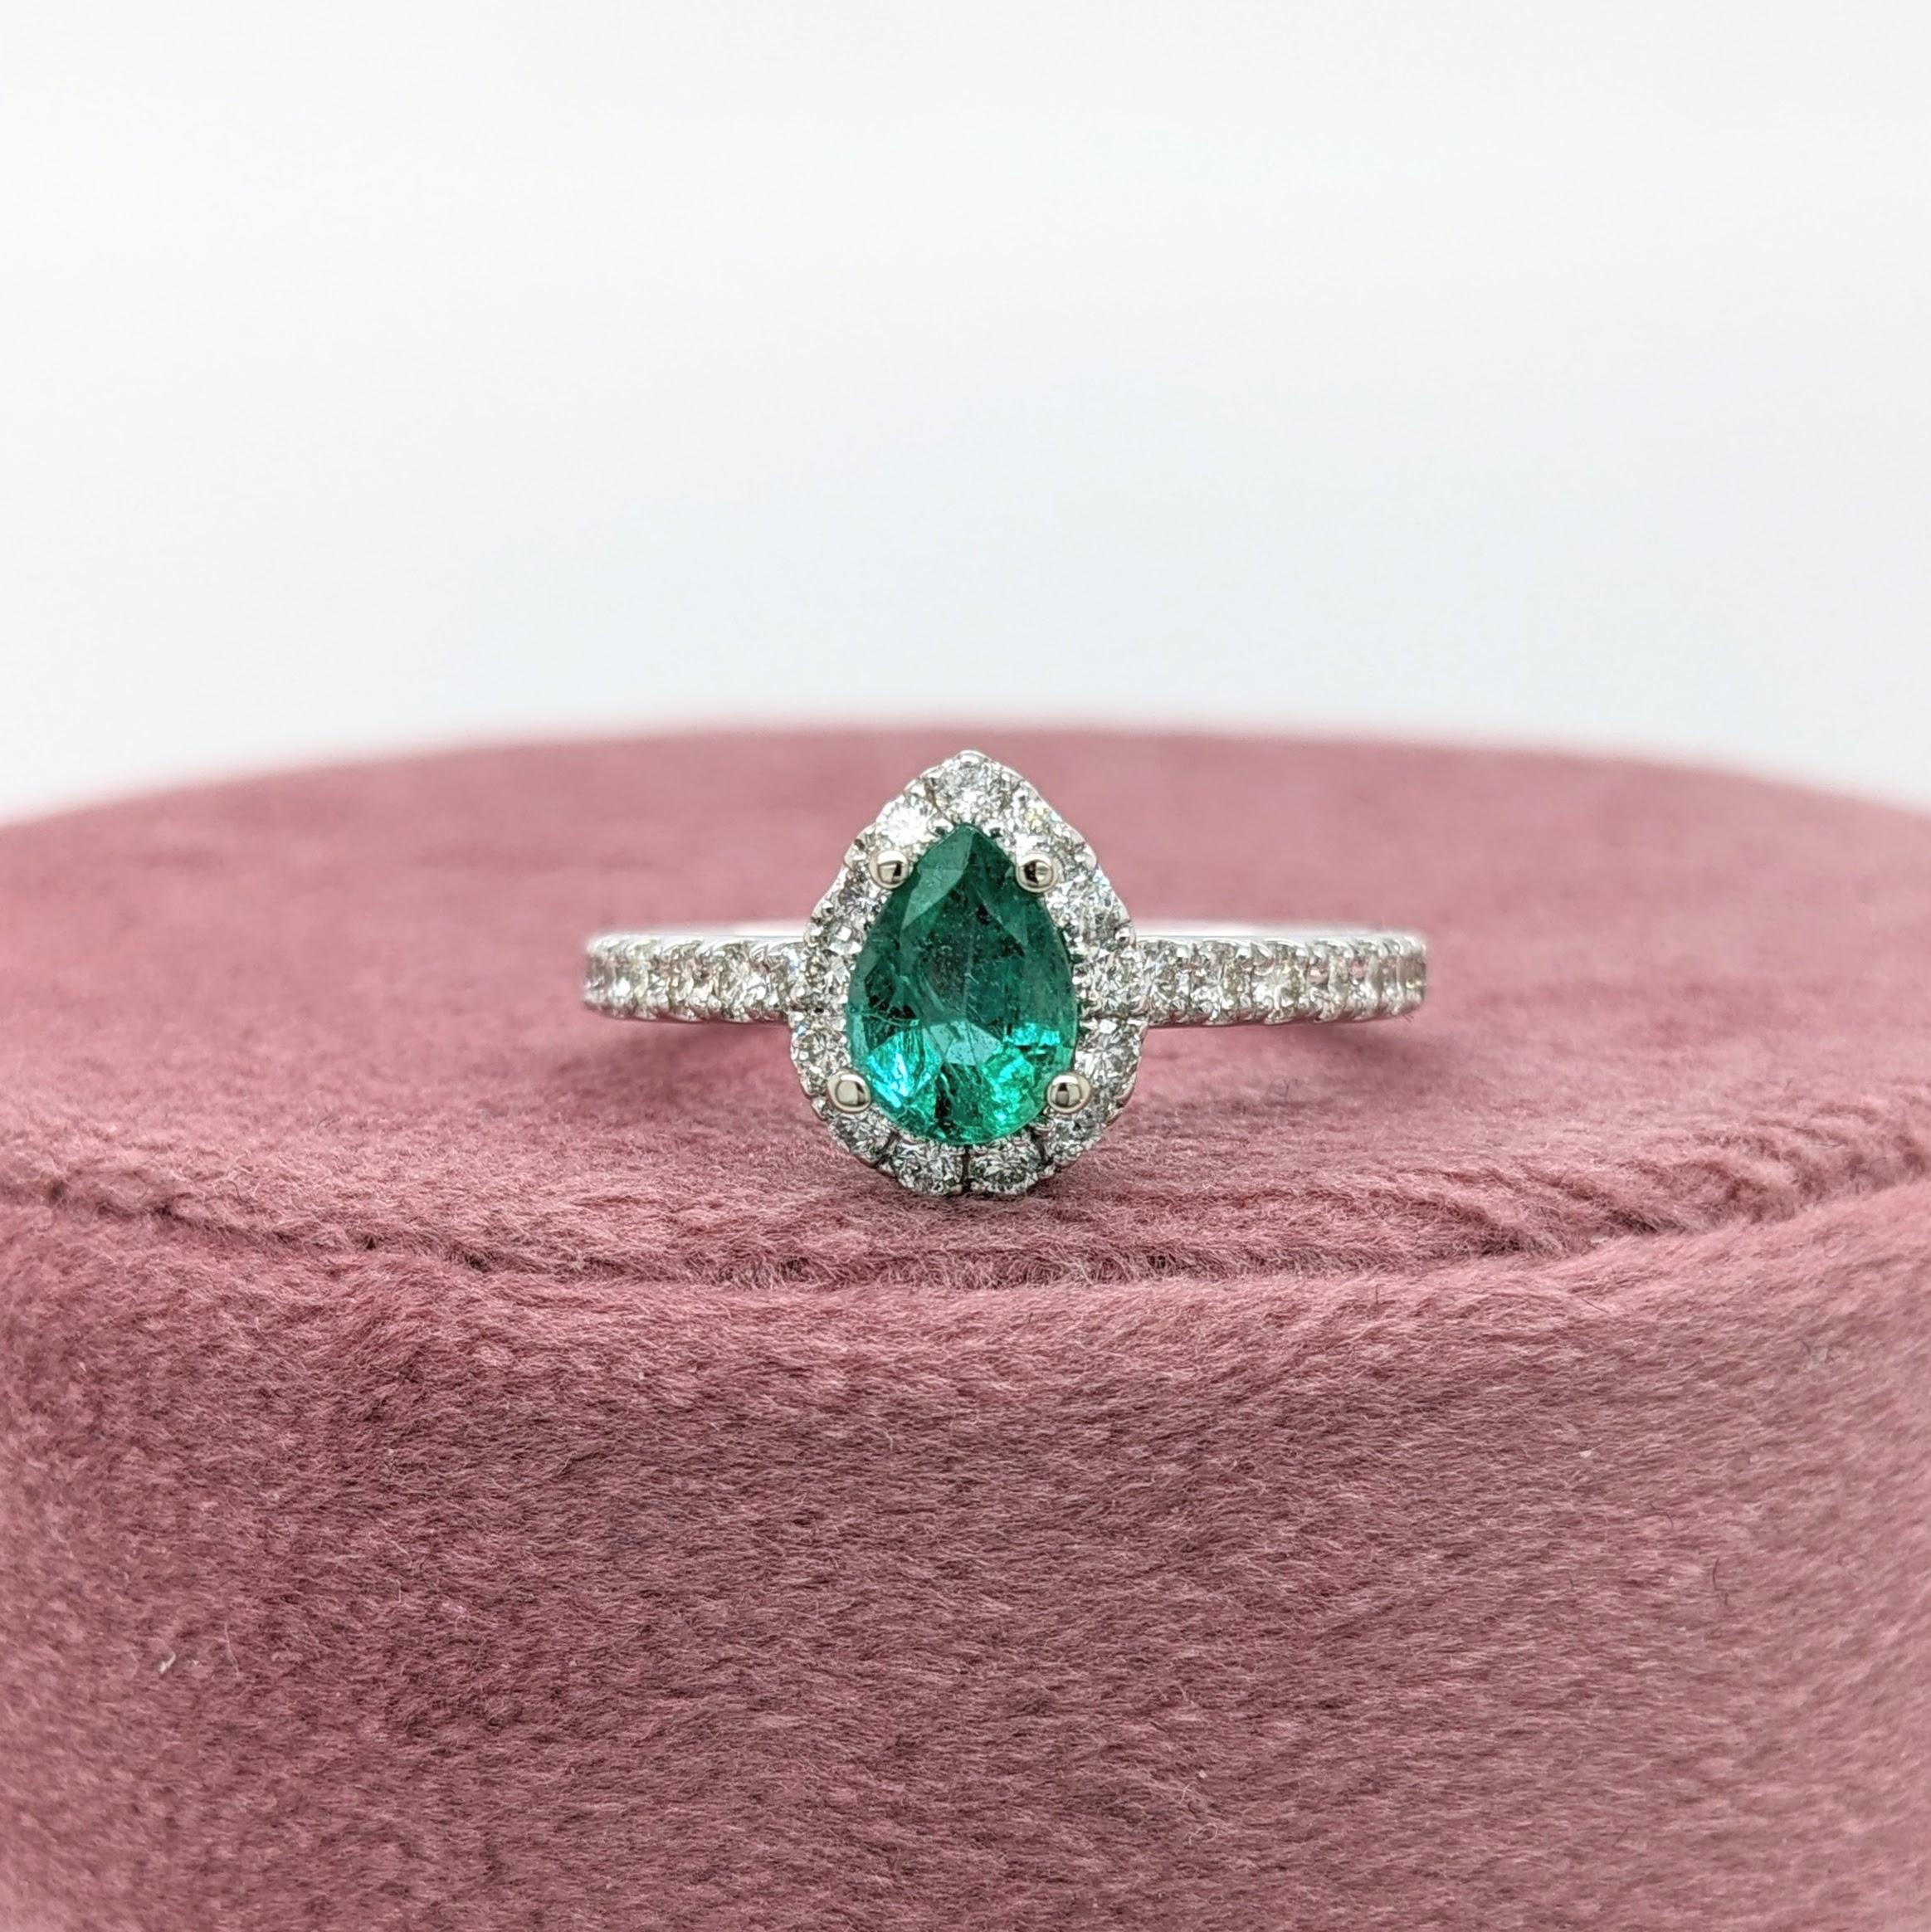 Specifications

Item Type: Ring
Center Stone: Emerald
Treatment: Oiled
Weight: 0.60ct
Head size: 7x5mm
Cut: Pear
Hardness: 7.5-8
Origin: Zambia

Metal: 14k/2.90g
Diamonds SI/GH: 27/0.44 cttw

Sku: 167098/2068

This ring is made with 14K Gold and